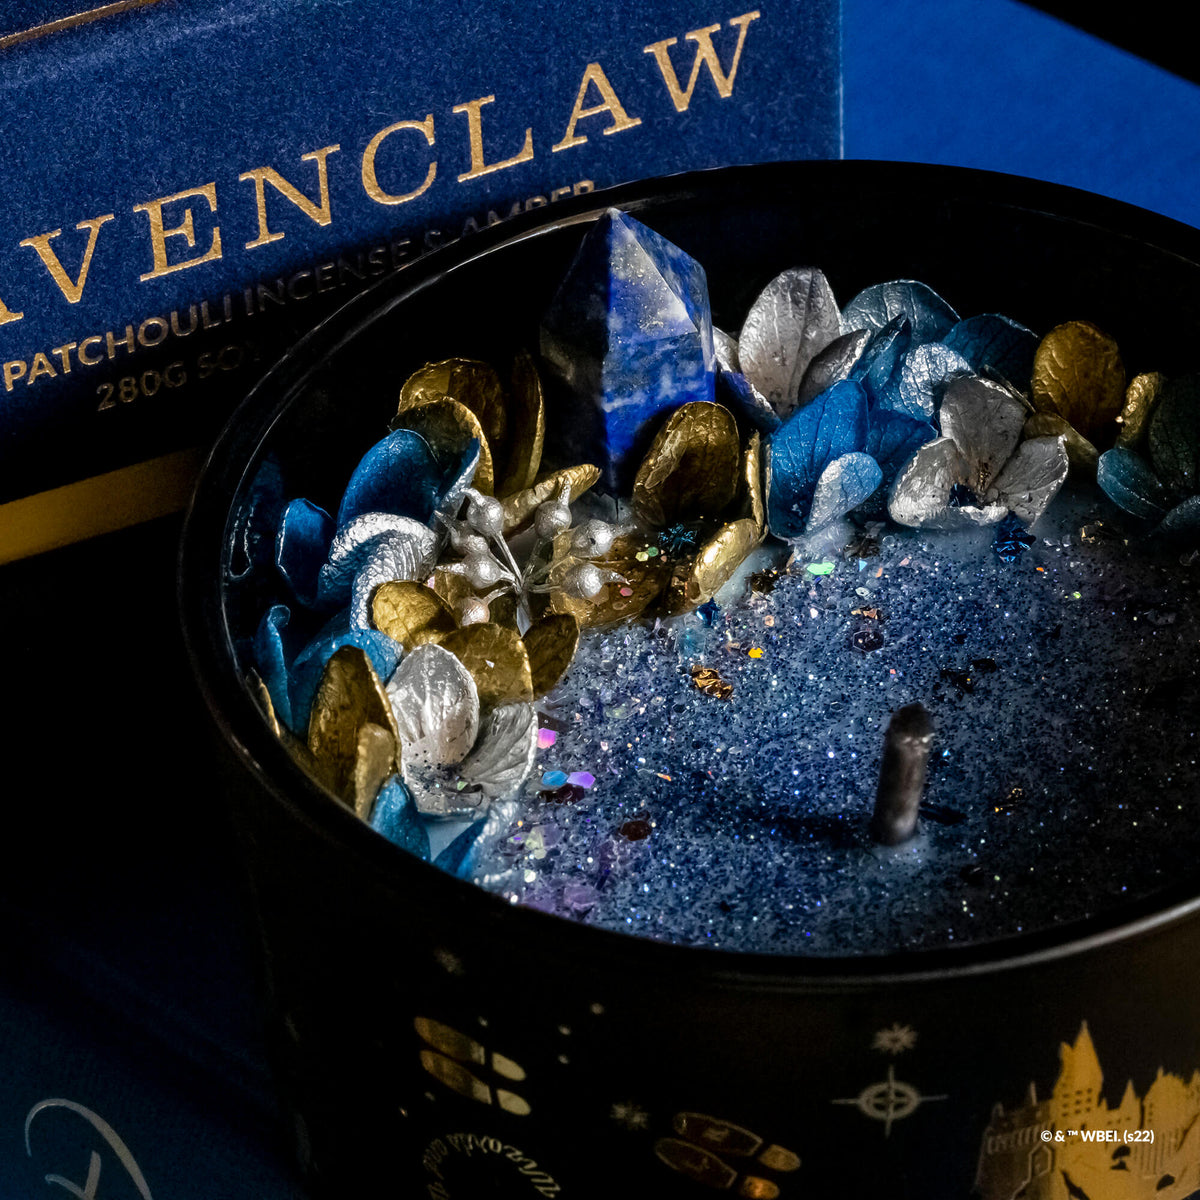 Short Story | Harry Potter Candle Ravenclaw 280g